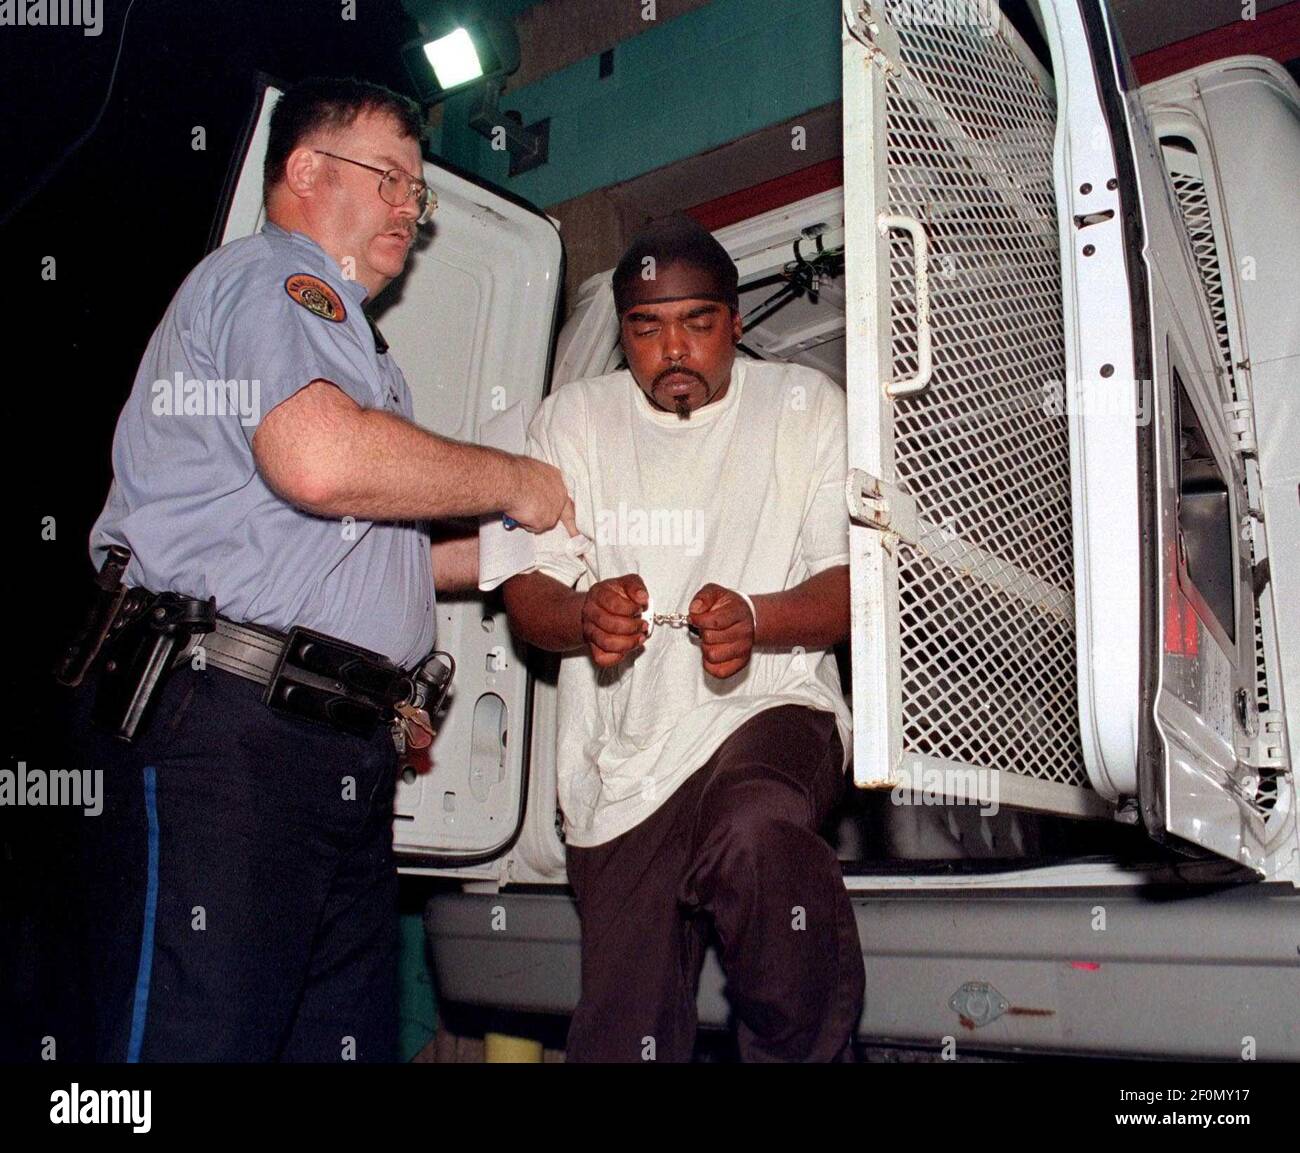 August 2003 - New Orleans, Louisiana - Police lead away murder suspect James Bannister in the 6th district as they struggle to keep a lid on out of control violence. Bannister was later convicted of second degree murder. Photo Credit: Charlie Varley/Sipa Press/0701082013 Stock Photo